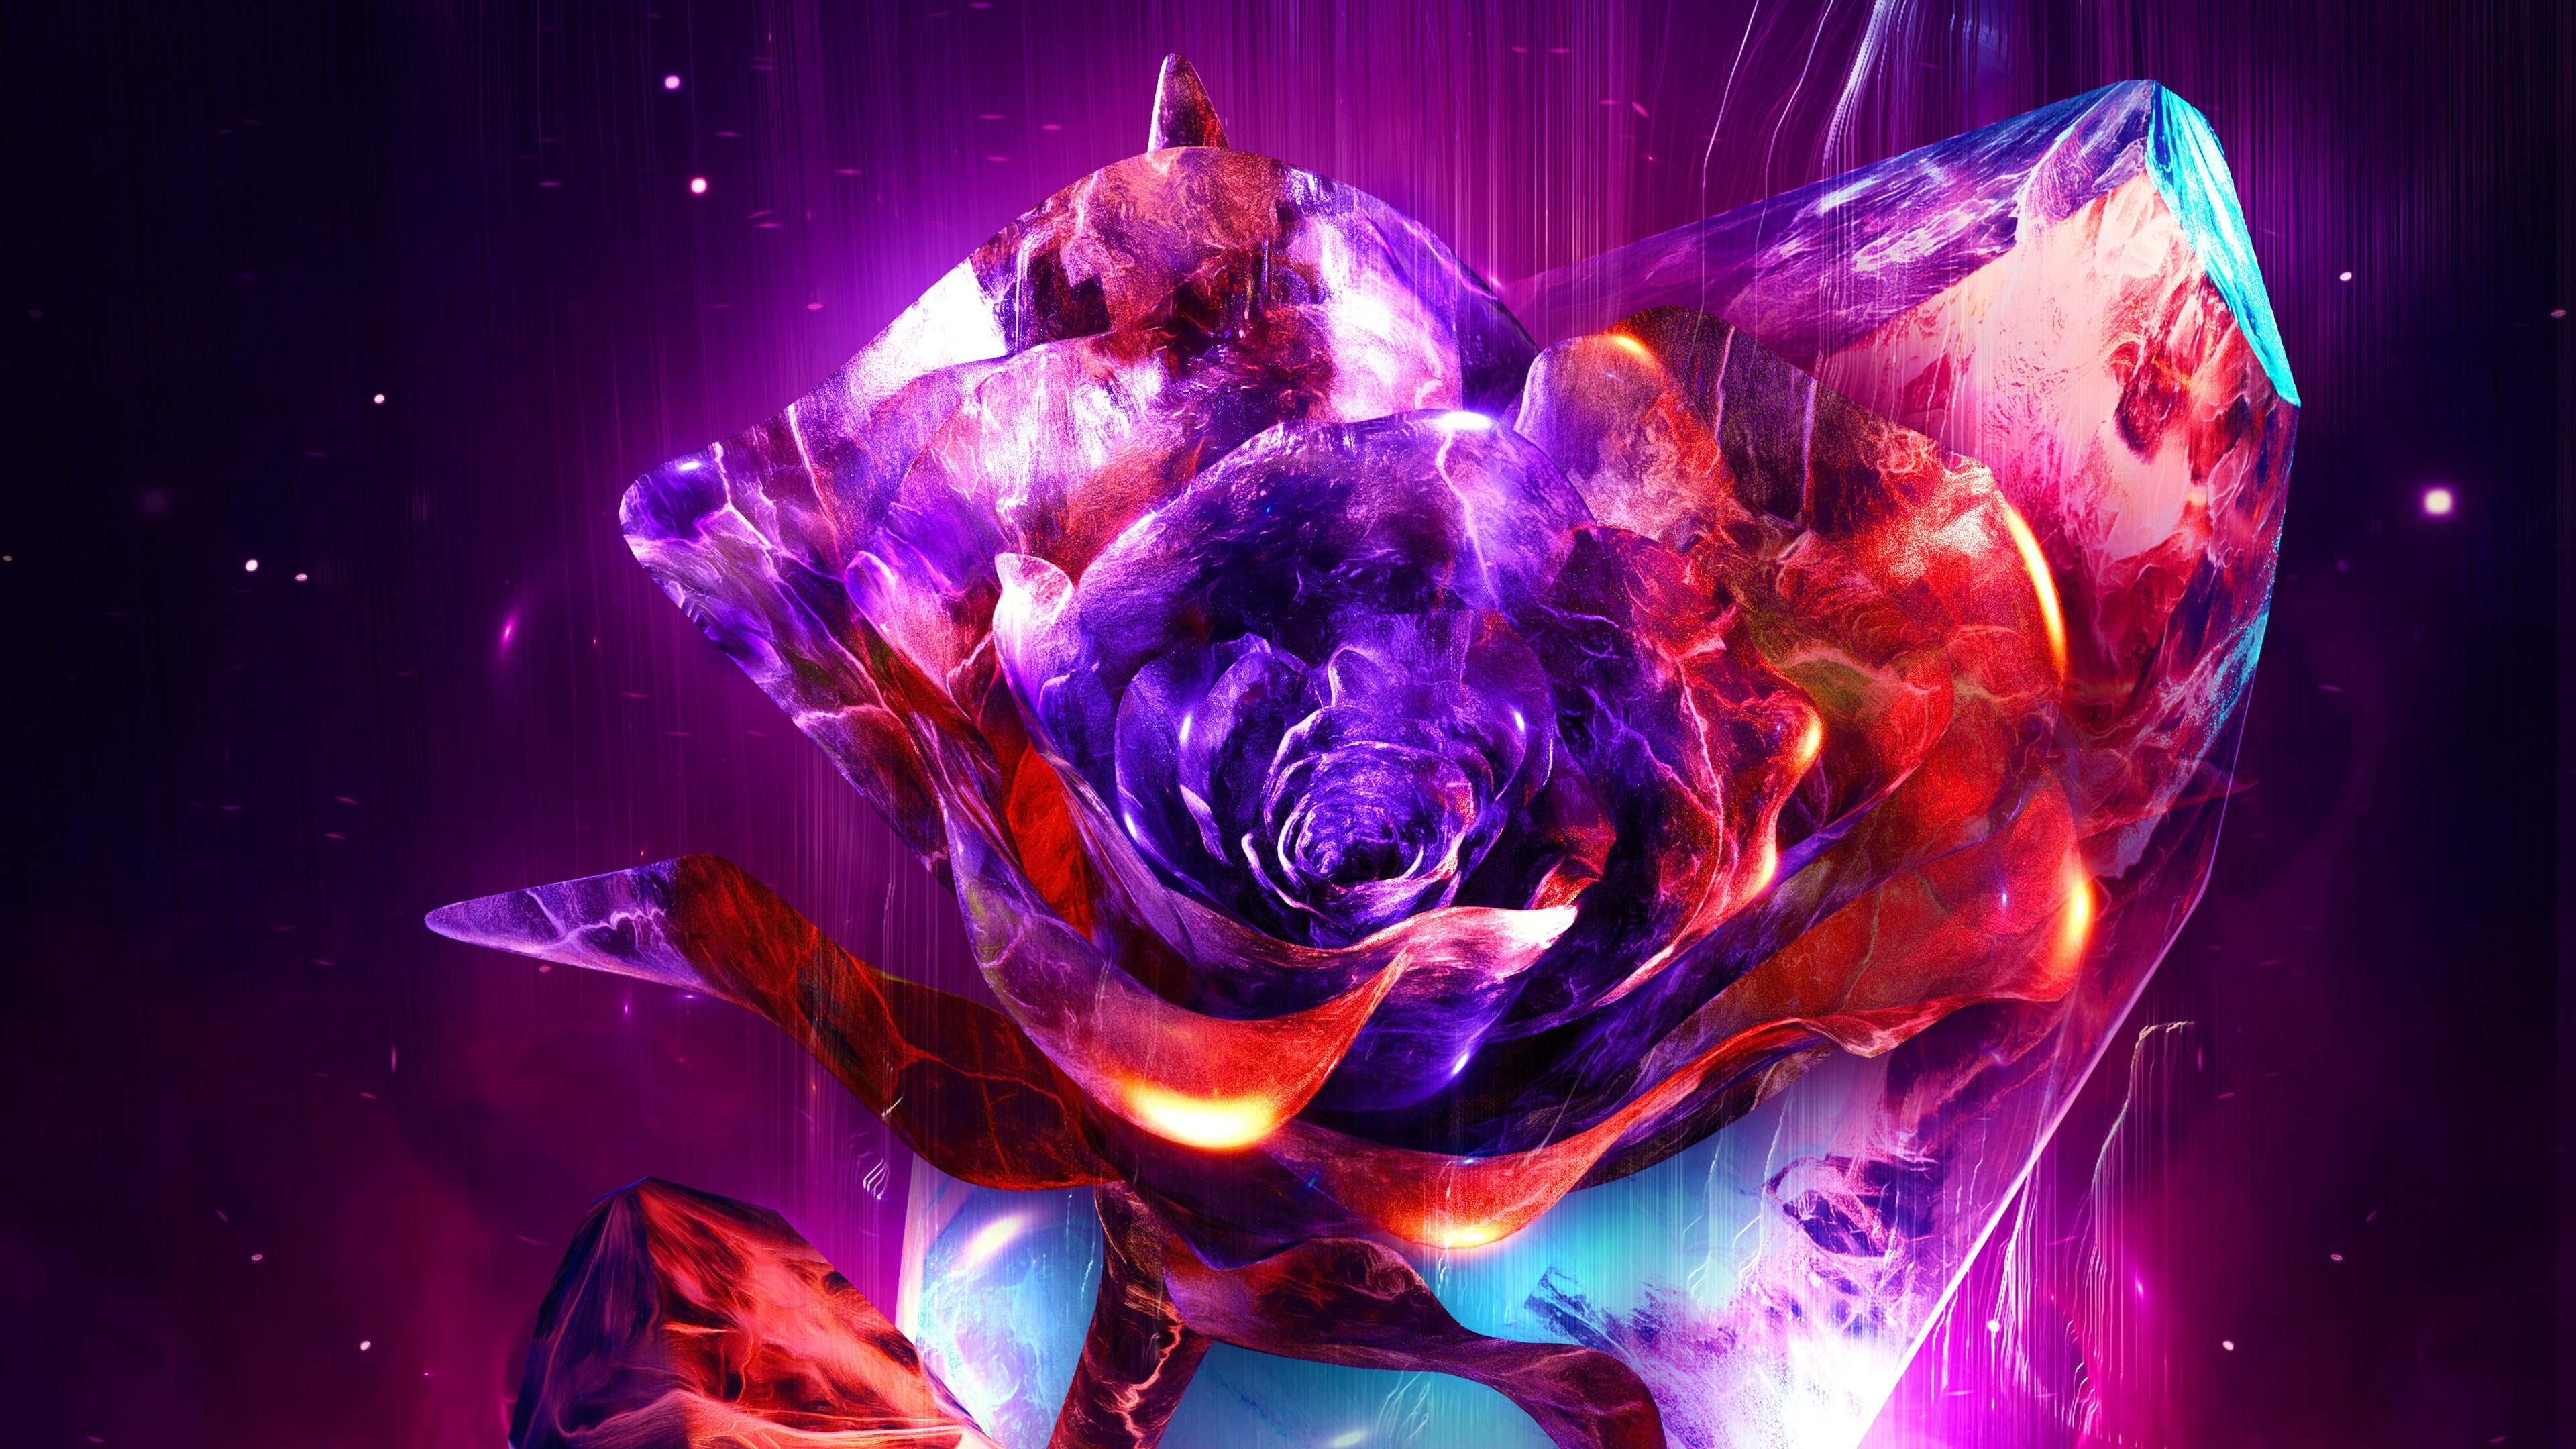 Blue Rose 1080P 2k 4k HD wallpapers backgrounds free download  Rare  Gallery